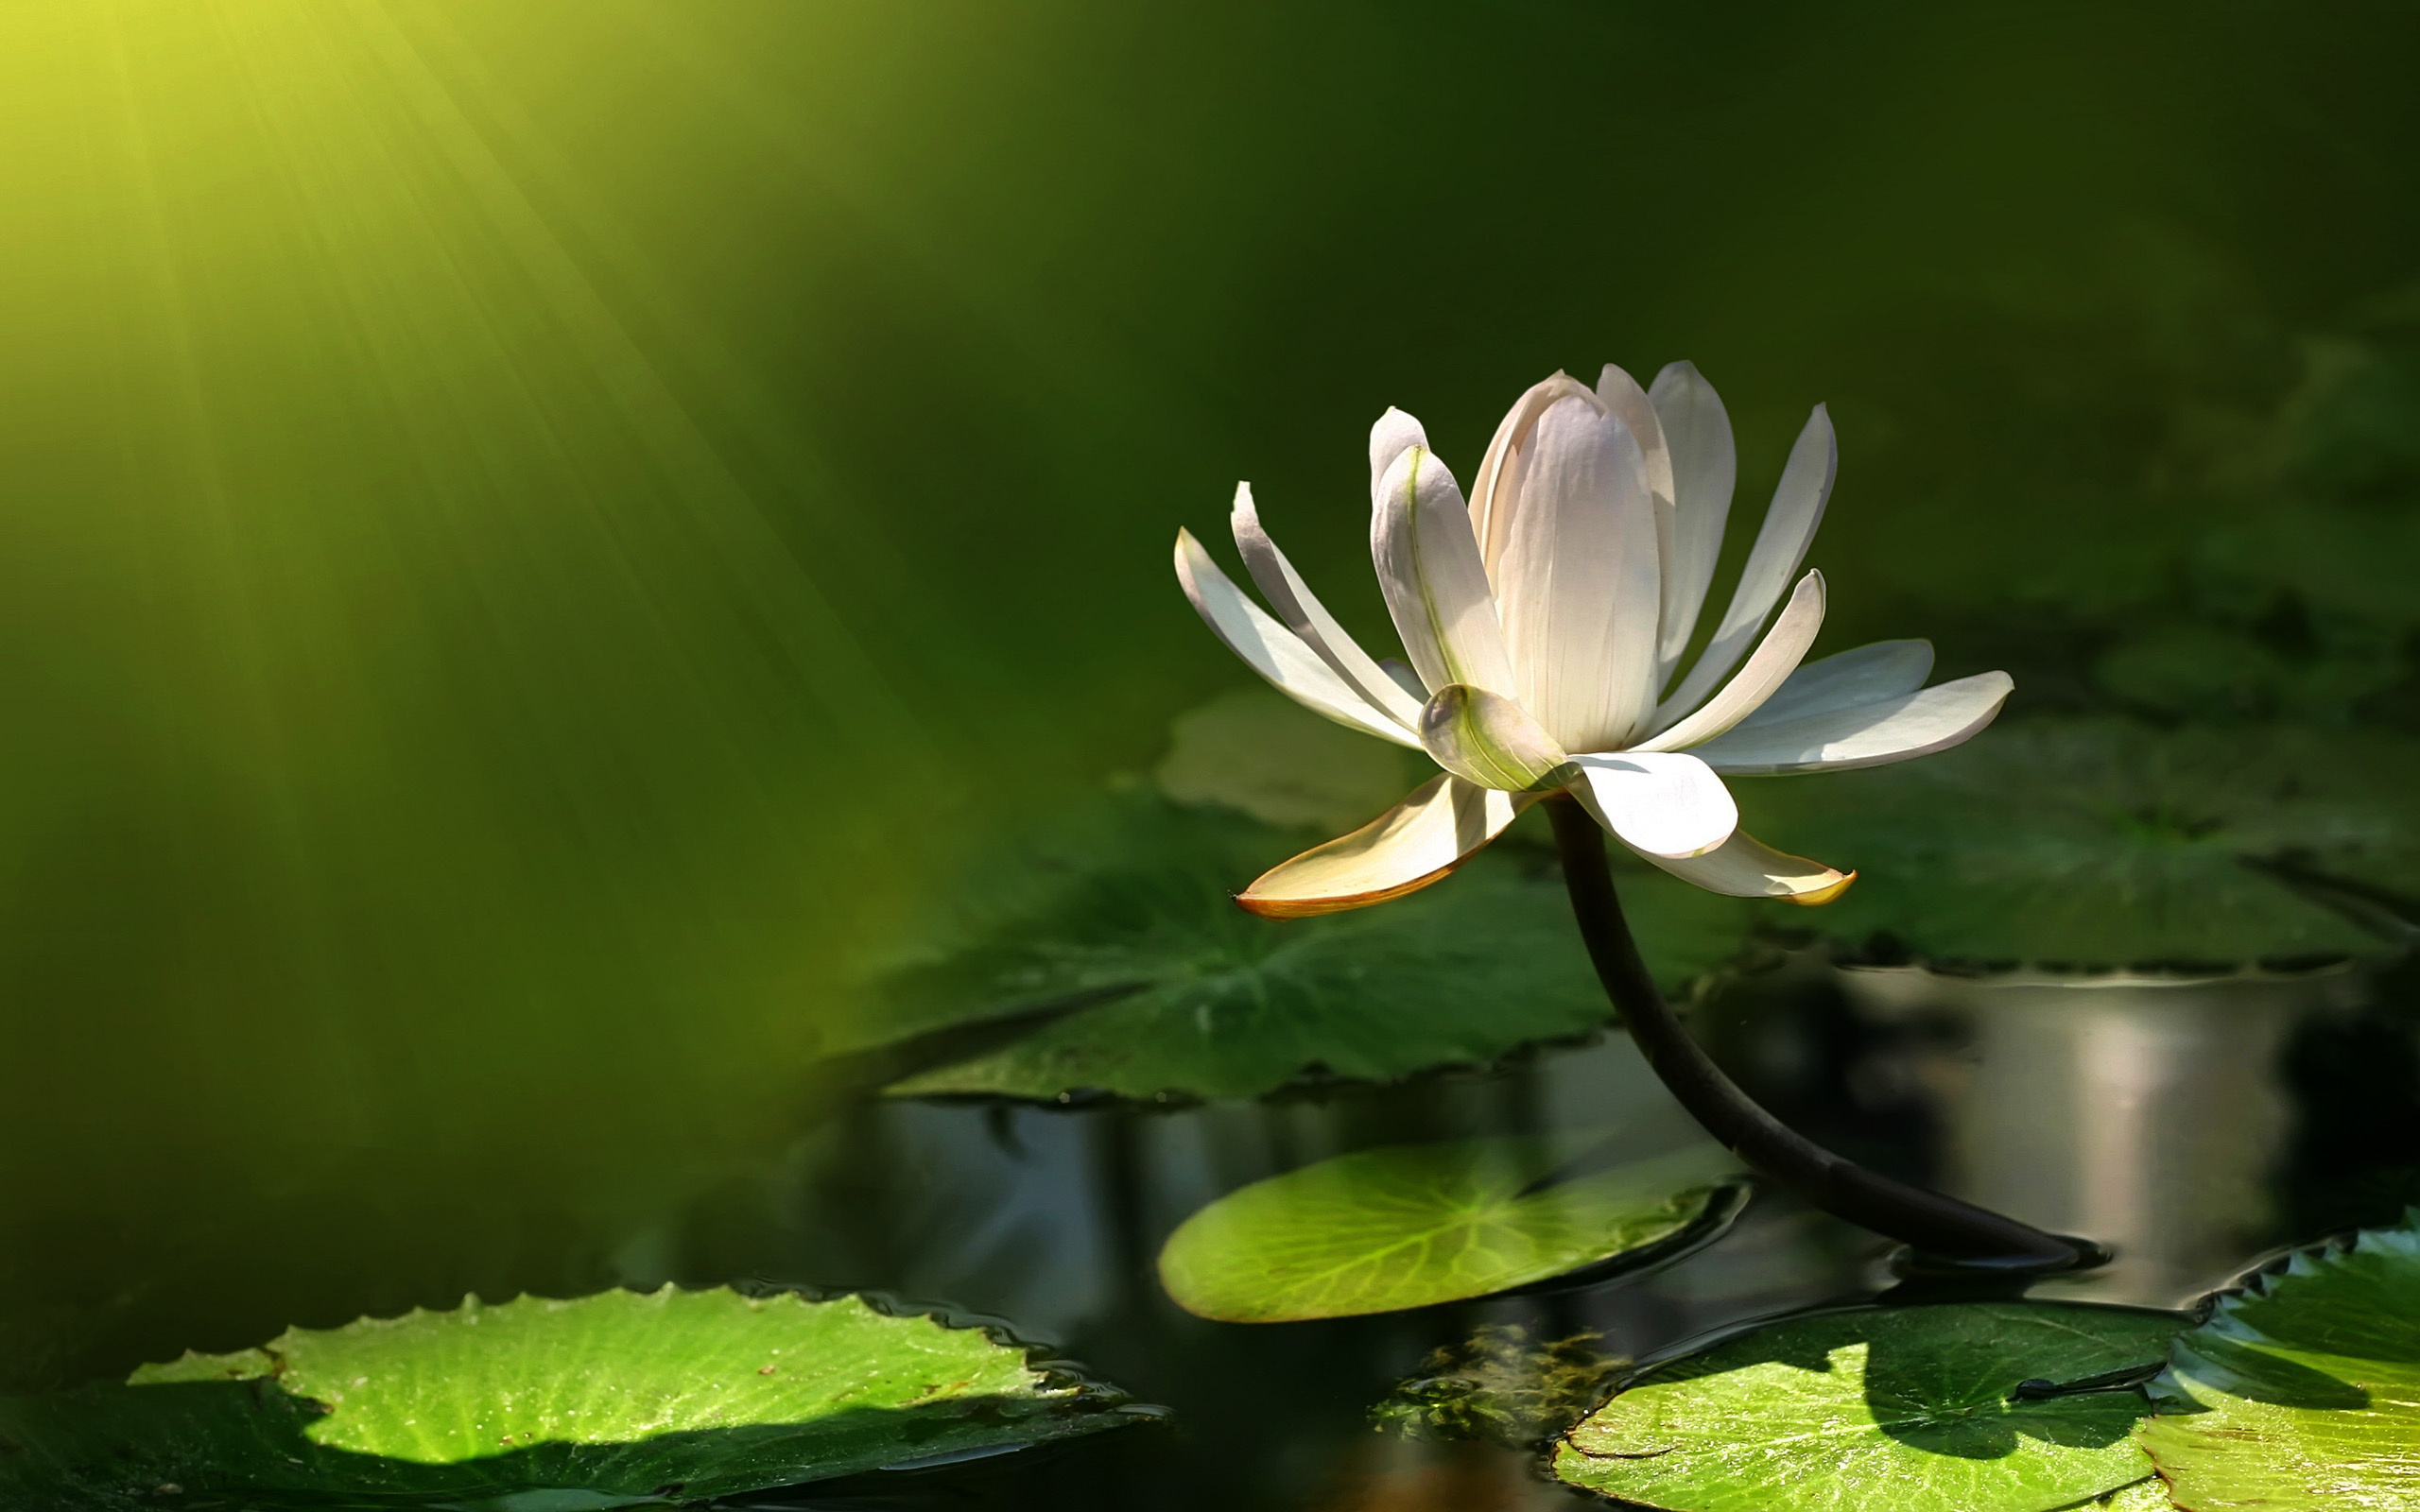 Nature's beauty captured in a vibrant water lily flower.